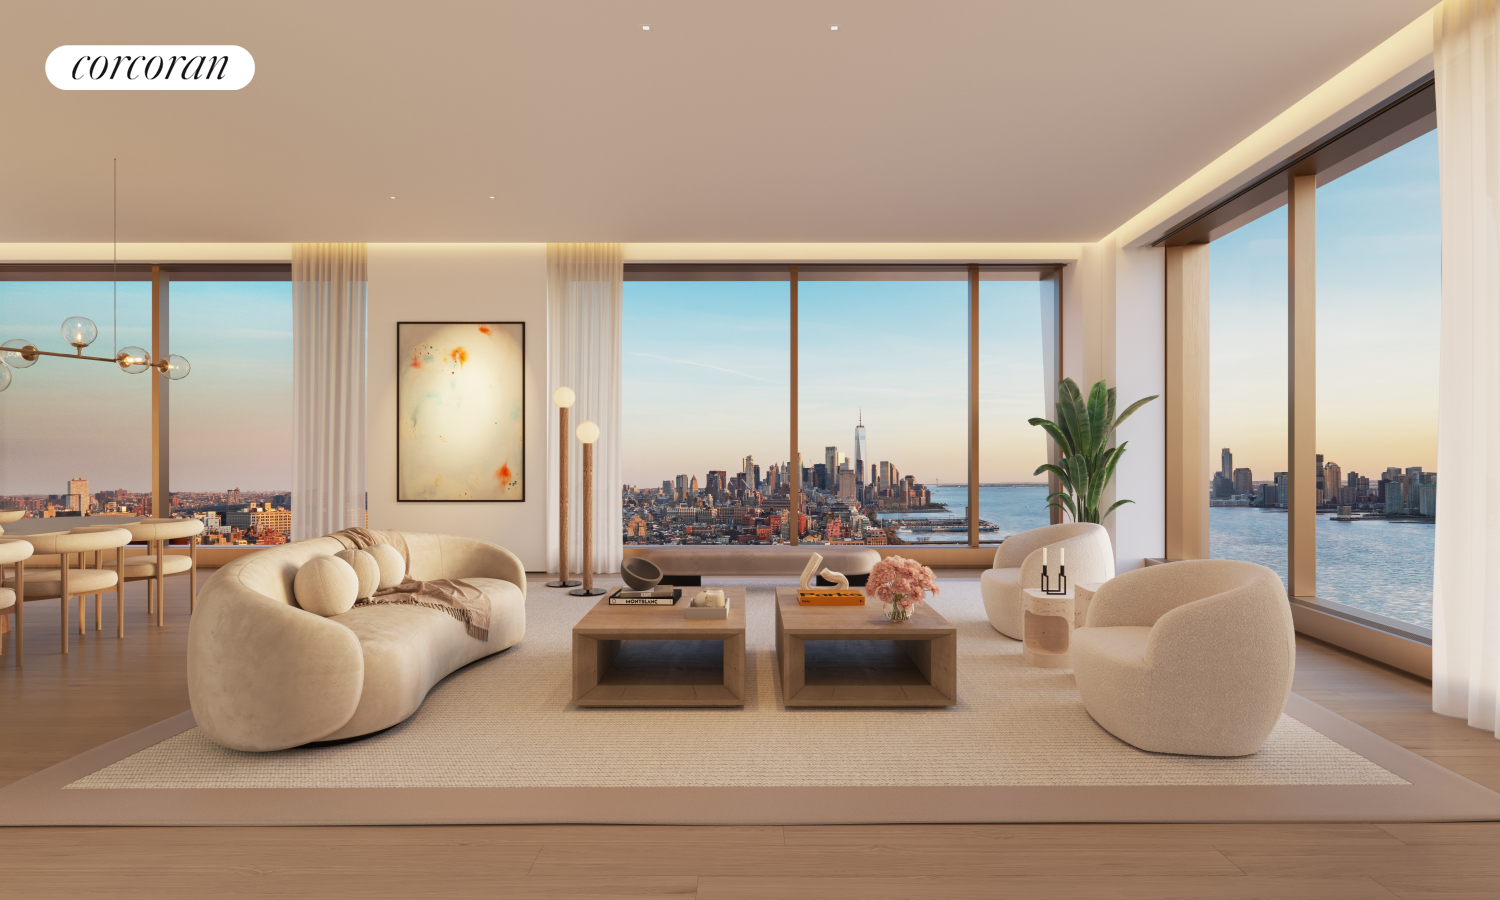 500 West 18th Street West 25D, Chelsea, Downtown, NYC - 4 Bedrooms  
4.5 Bathrooms  
7 Rooms - 